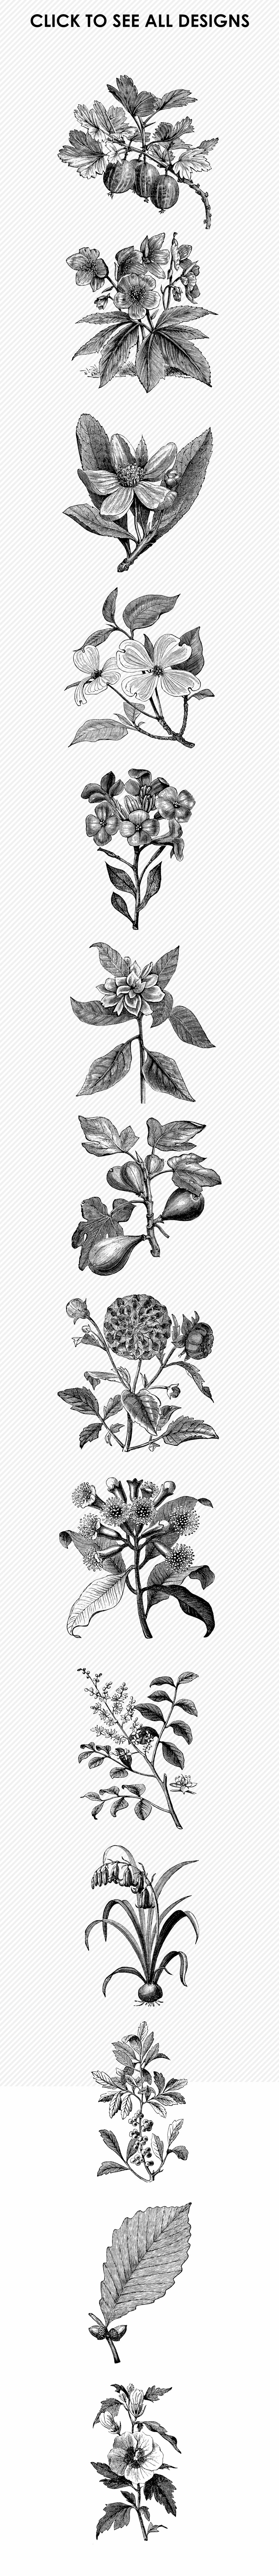 Antique Florals PS Brushes & Stampspreview image.